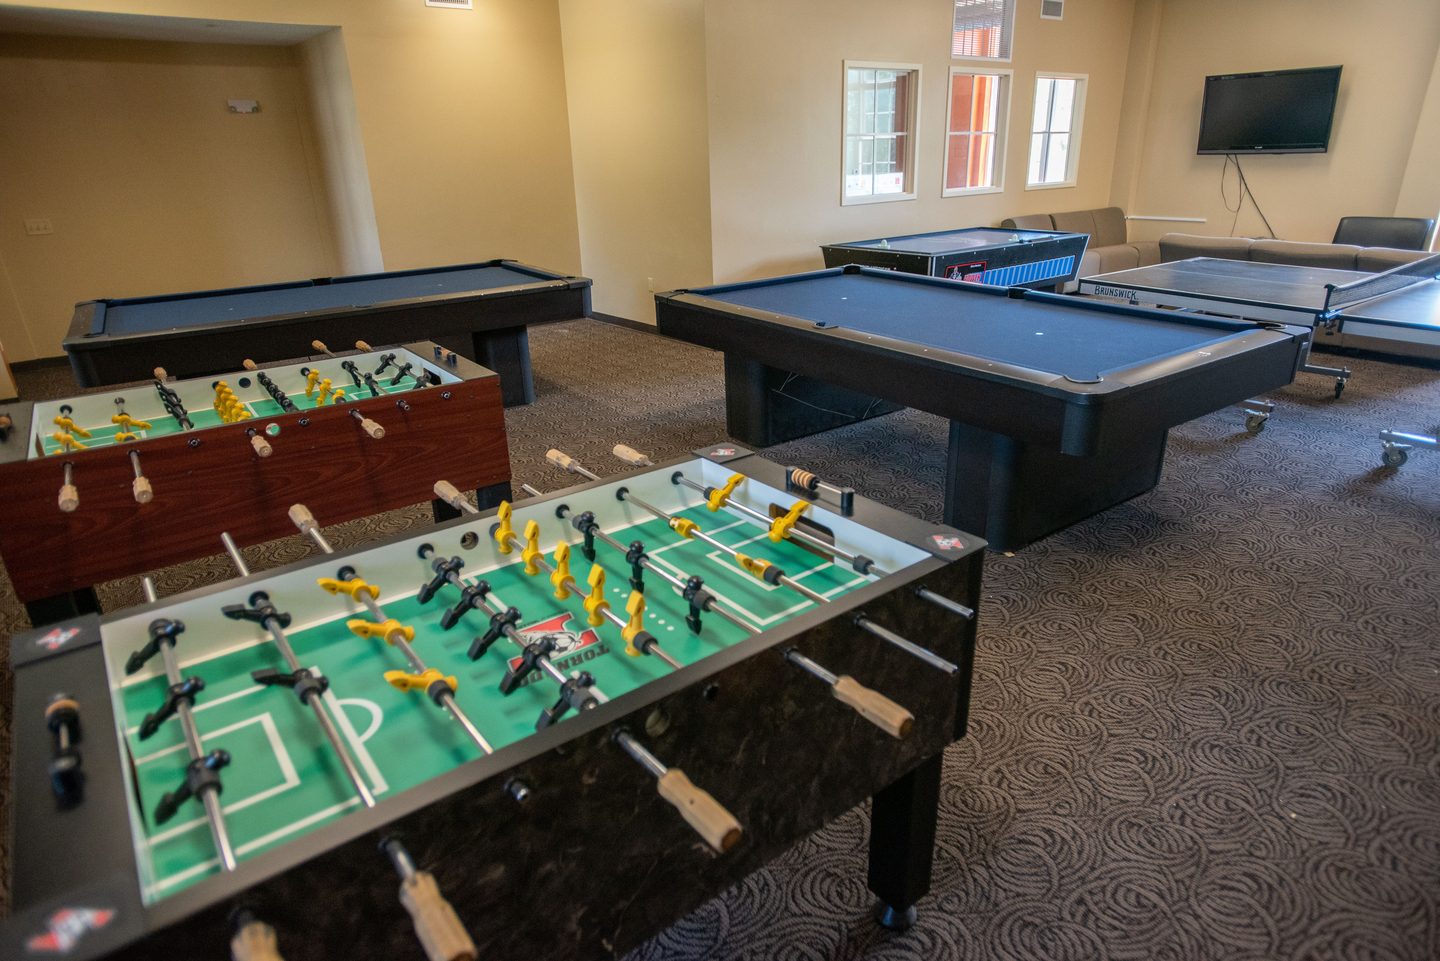 Residential Life game room with air hockey, foosball, and pool tables